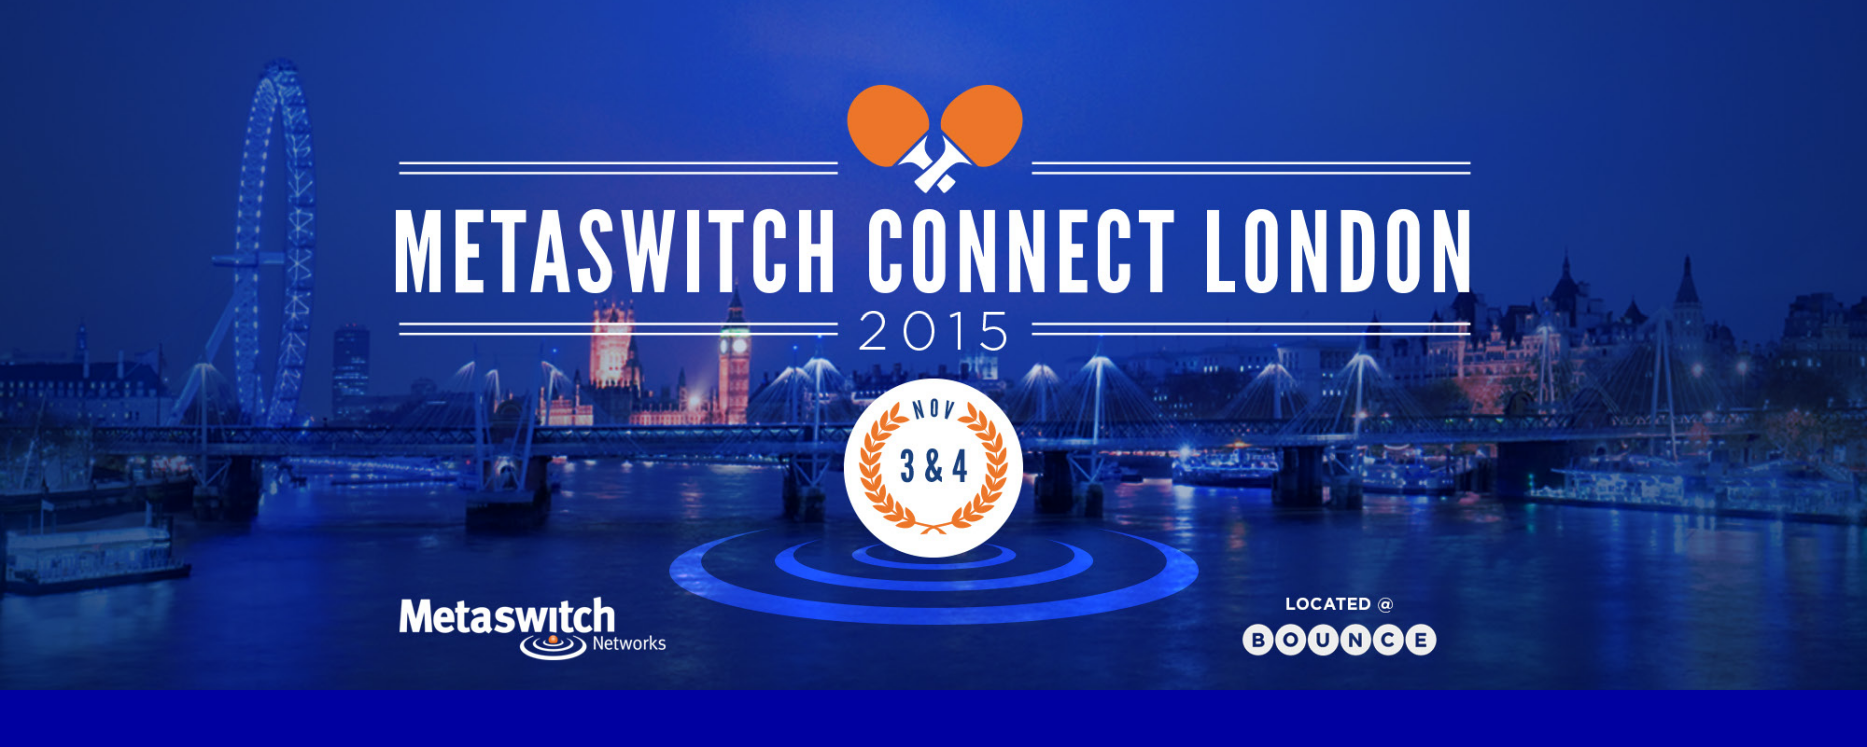 Metaswitch-Connect-London--logo.png